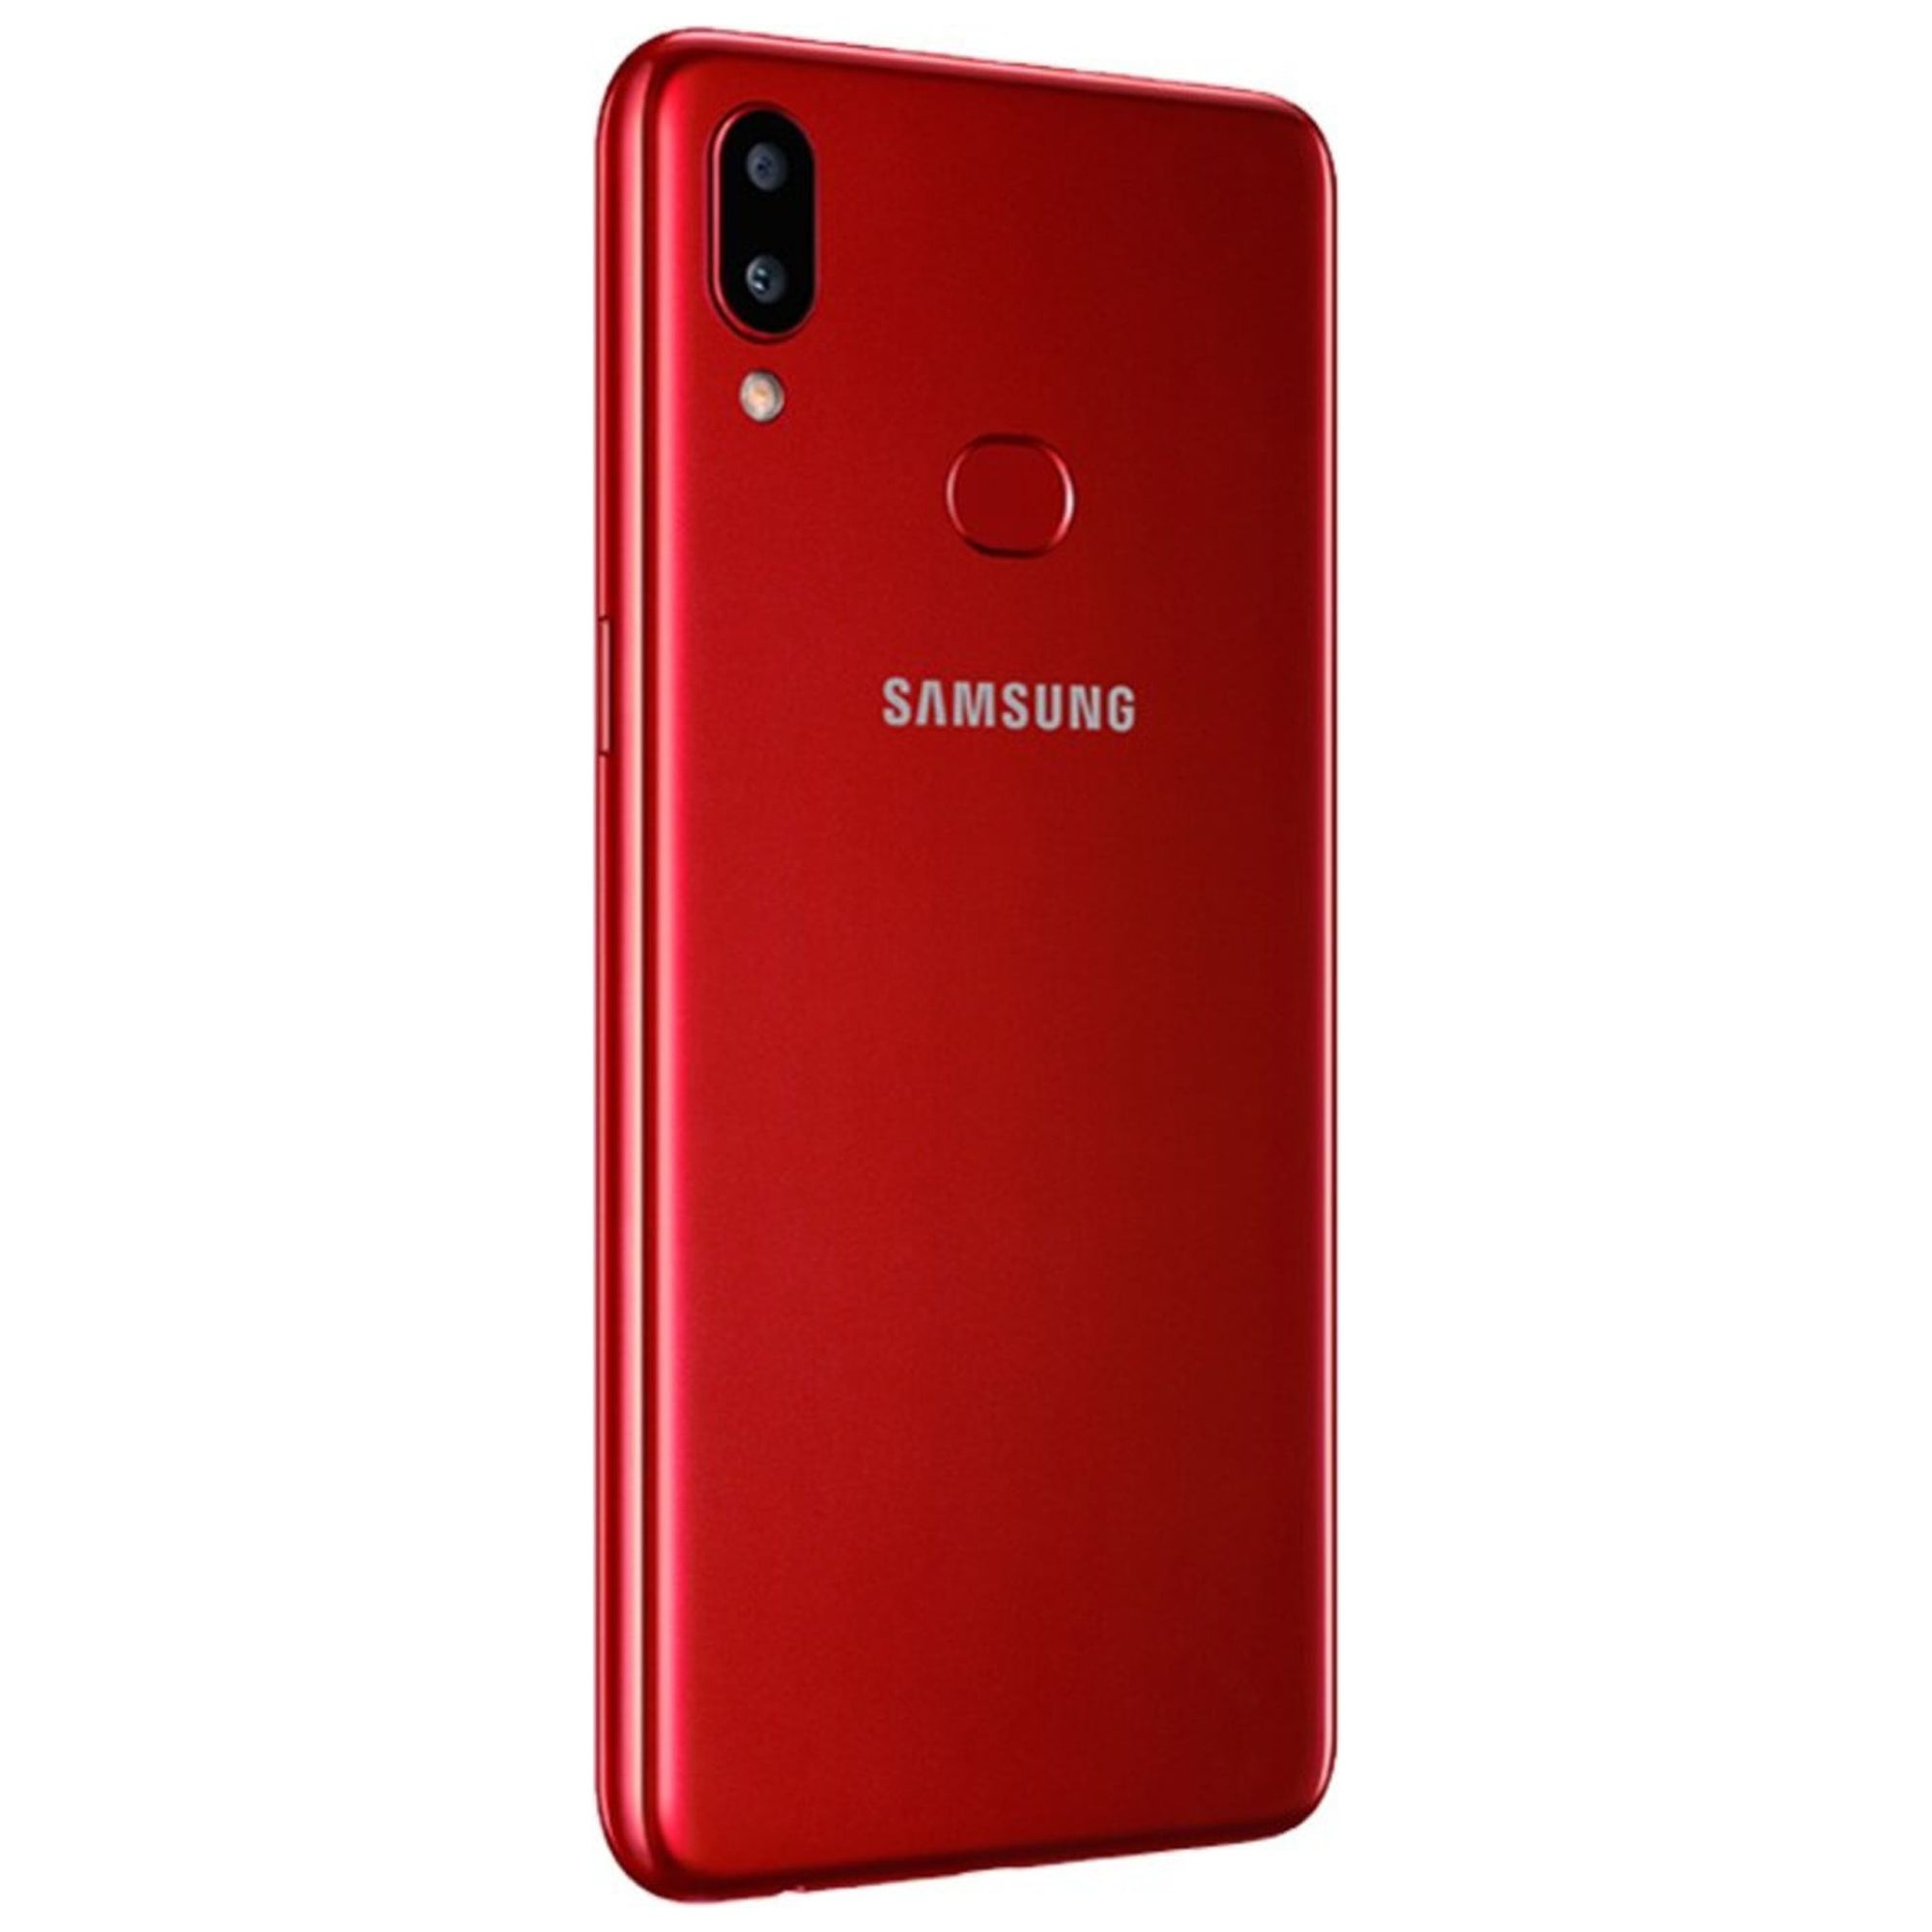 SAMSUNG Galaxy A10S A107M, 32GB, GSM Unlocked Dual SIM (International Variant/US Compatible LTE) – Red - image 4 of 4